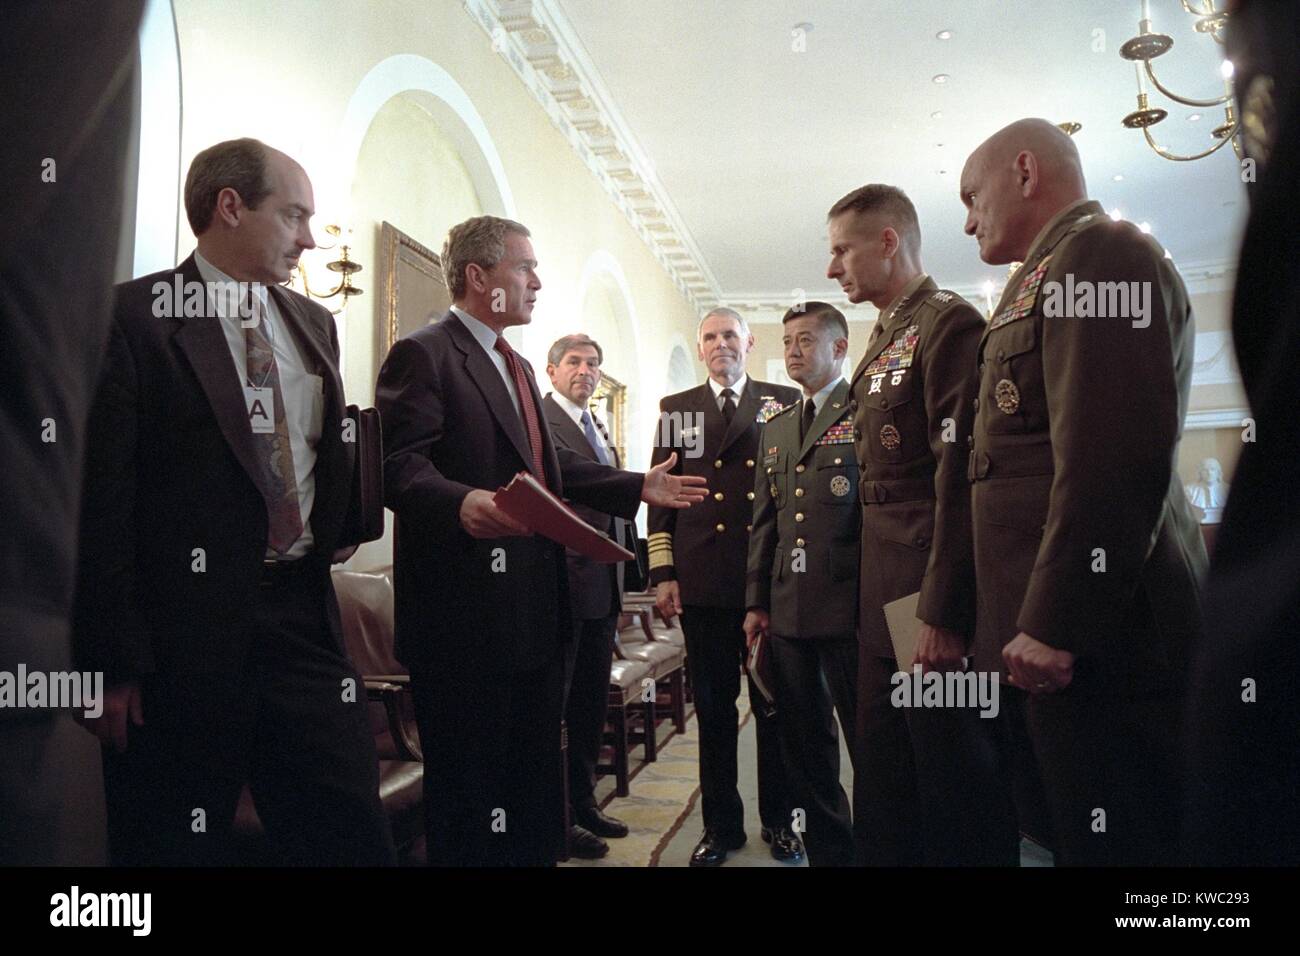 President George W. Bush with Chiefs of Staff, Oct. 24, 2001. Meeting with him are from left: Adm. Richard Mies, Gen. Eric Shinseki, Gen. Peter Pace, and Gen. Michael Williams. (BSLOC 2015 2 177) Stock Photo